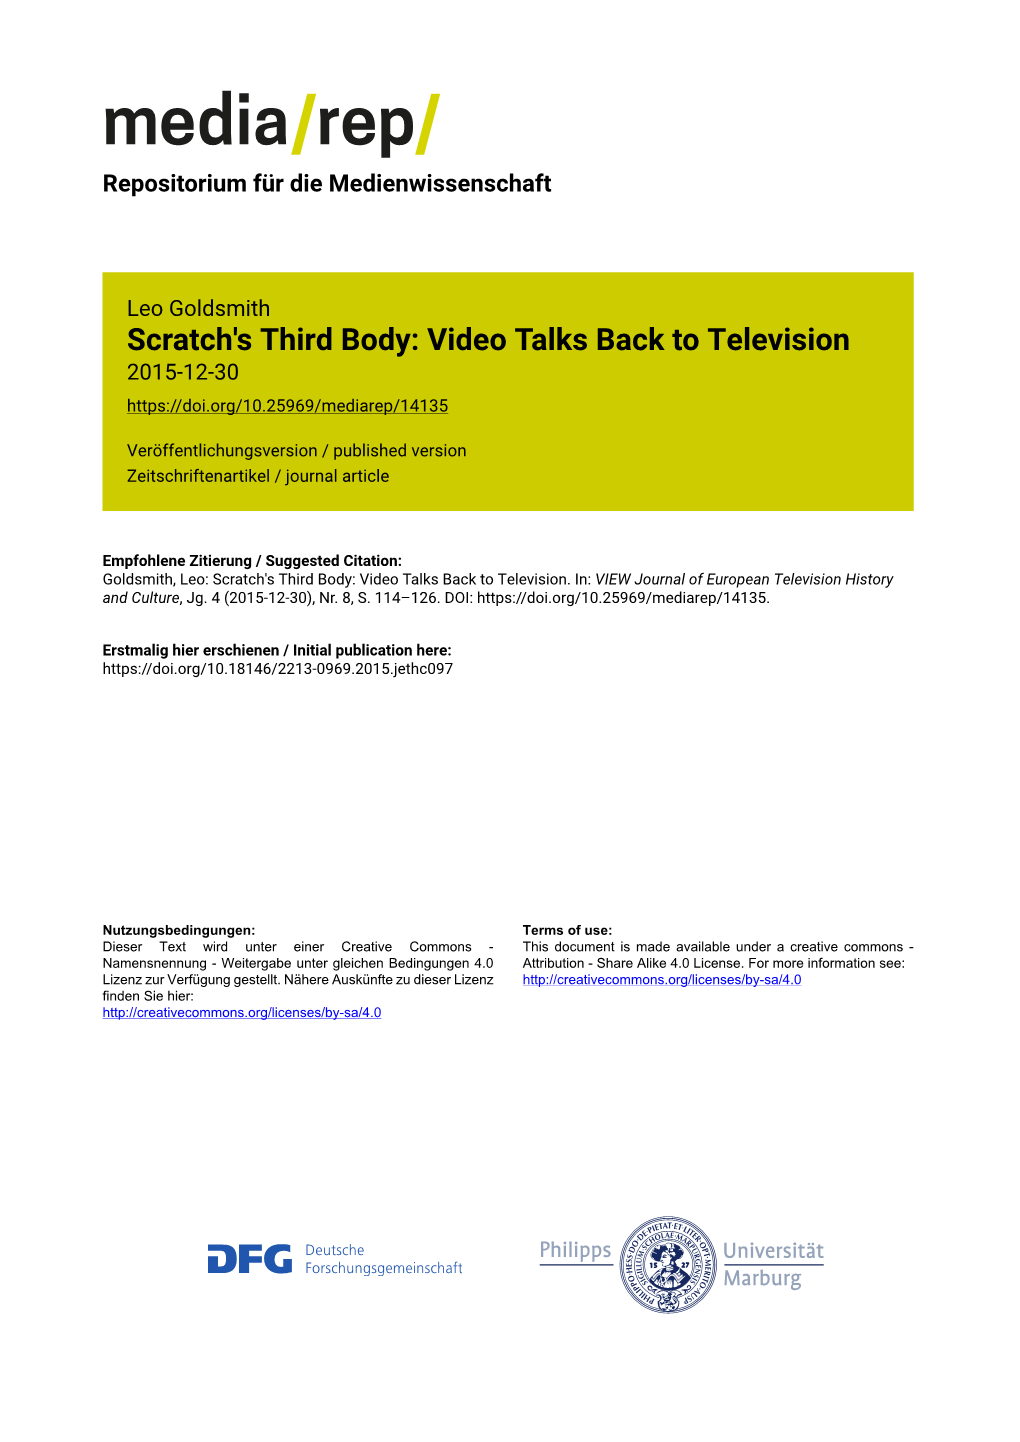 Scratch's Third Body: Video Talks Back to Television 2015-12-30